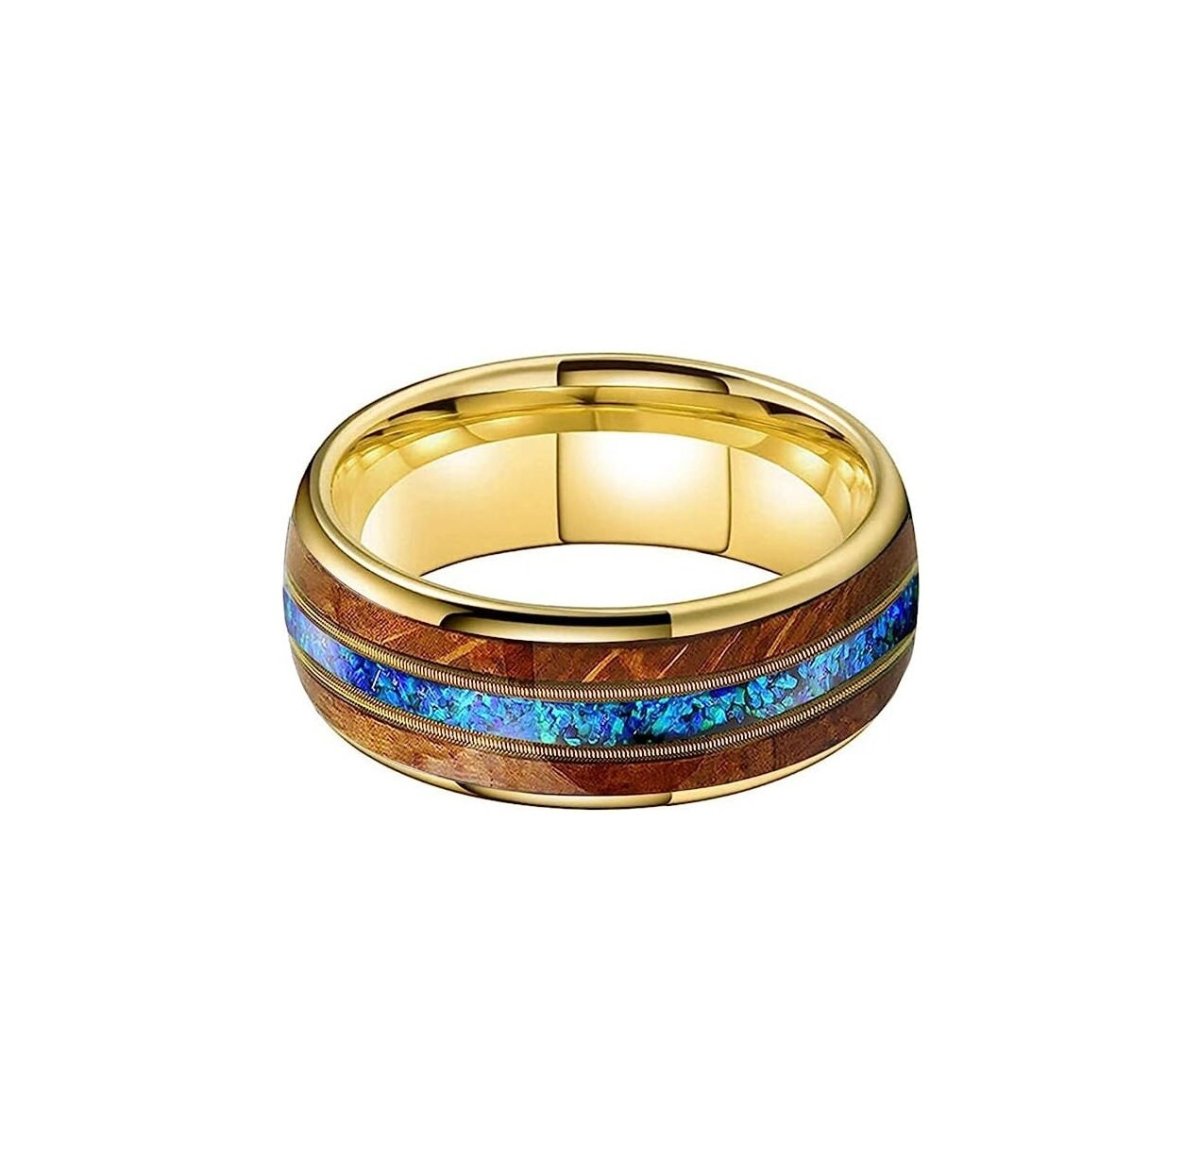 Golden Musician - Guitar String Men's Wedding Band with Whiskey Barrel and Opal Inlay